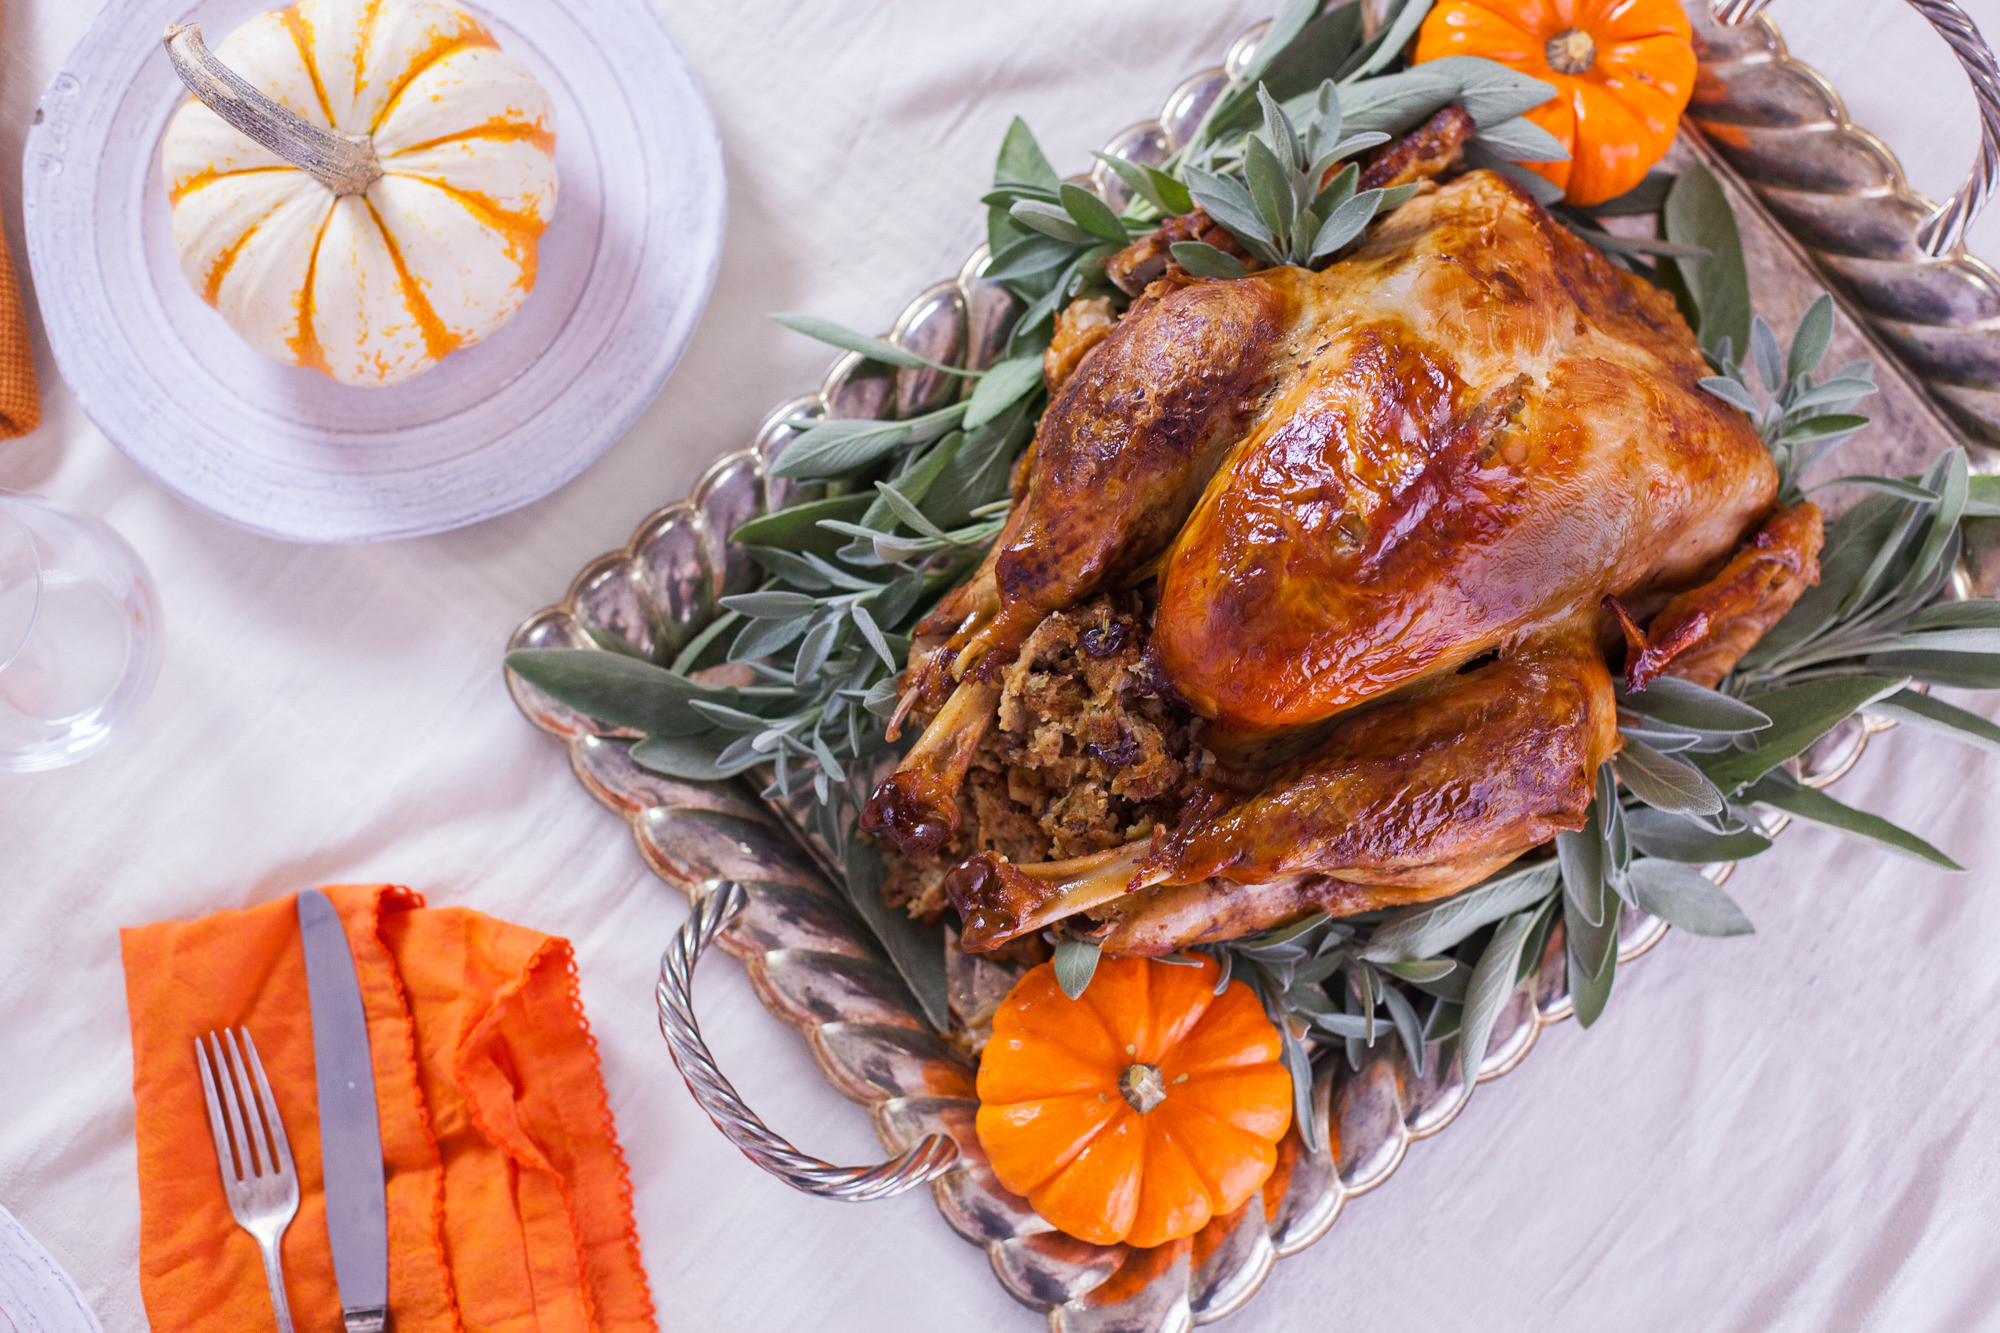 Turkey Cooking Recipes For Thanksgiving
 Different Ways To Cook Turkey Recipes For Cooking A